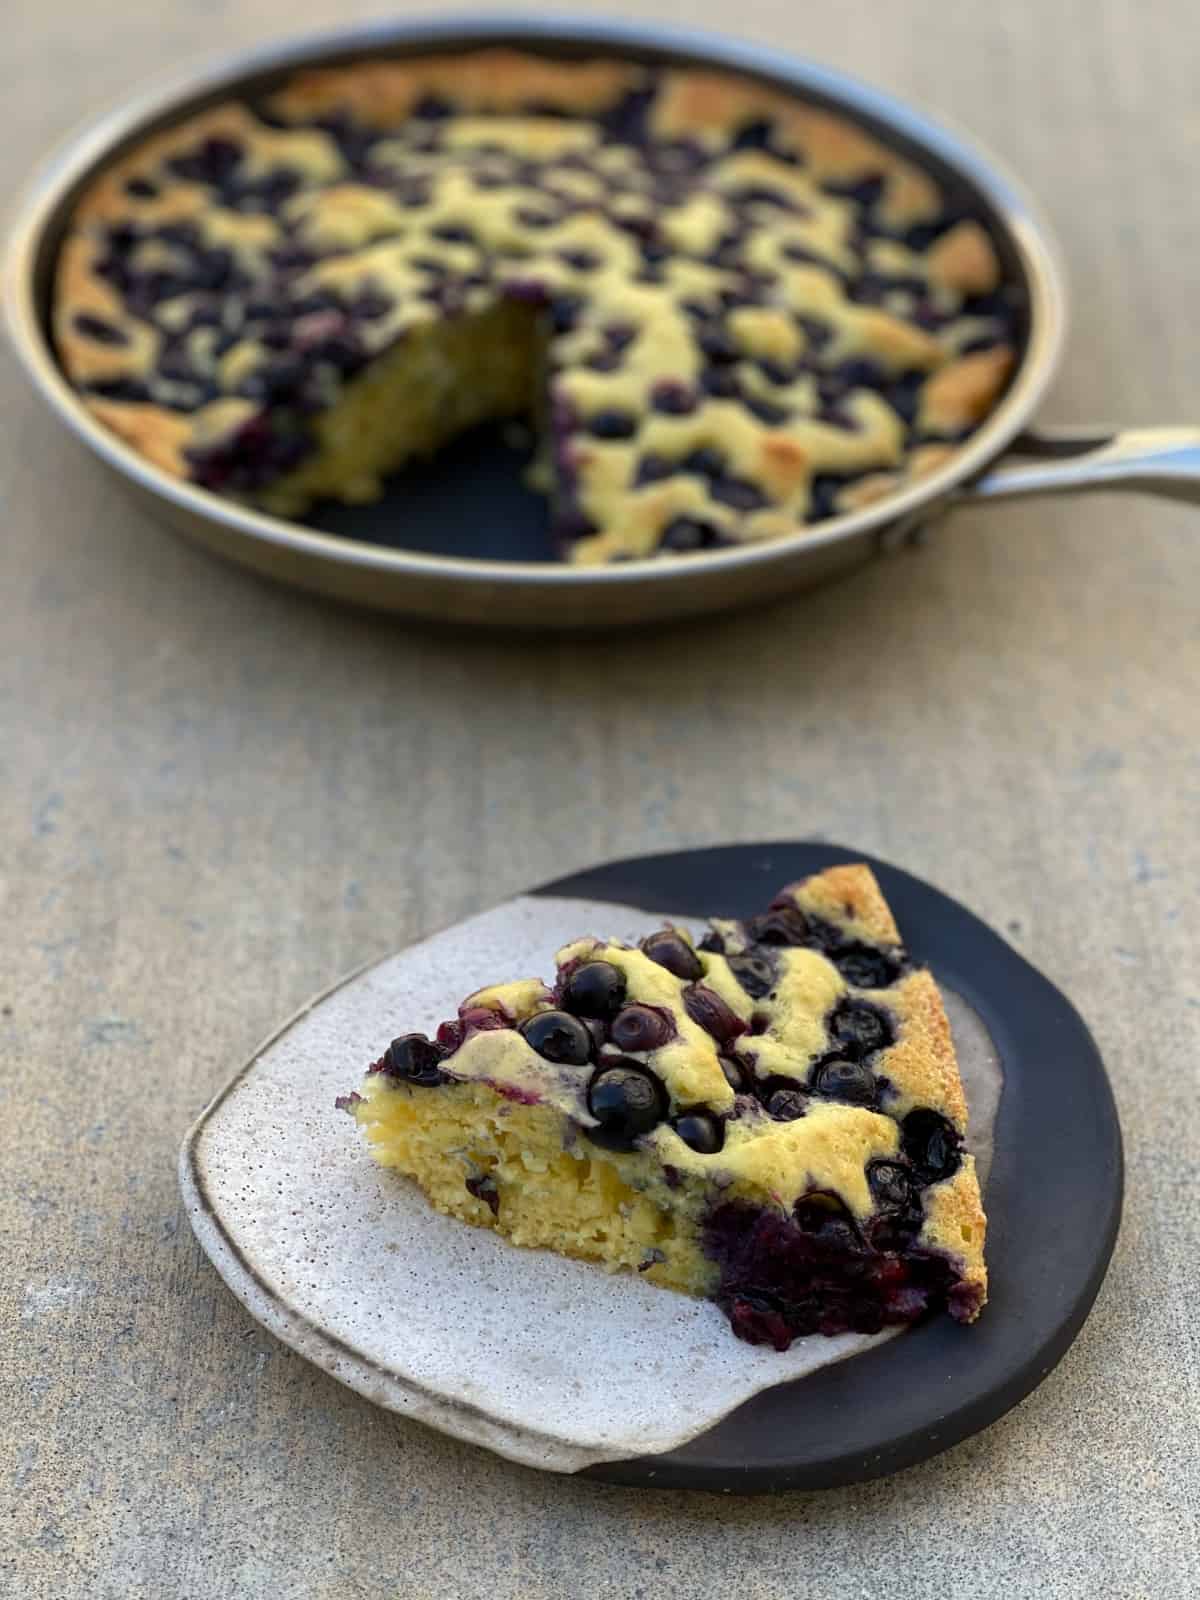 Wedge of blueberry oven pancake on ceramic plate with skillet in background.